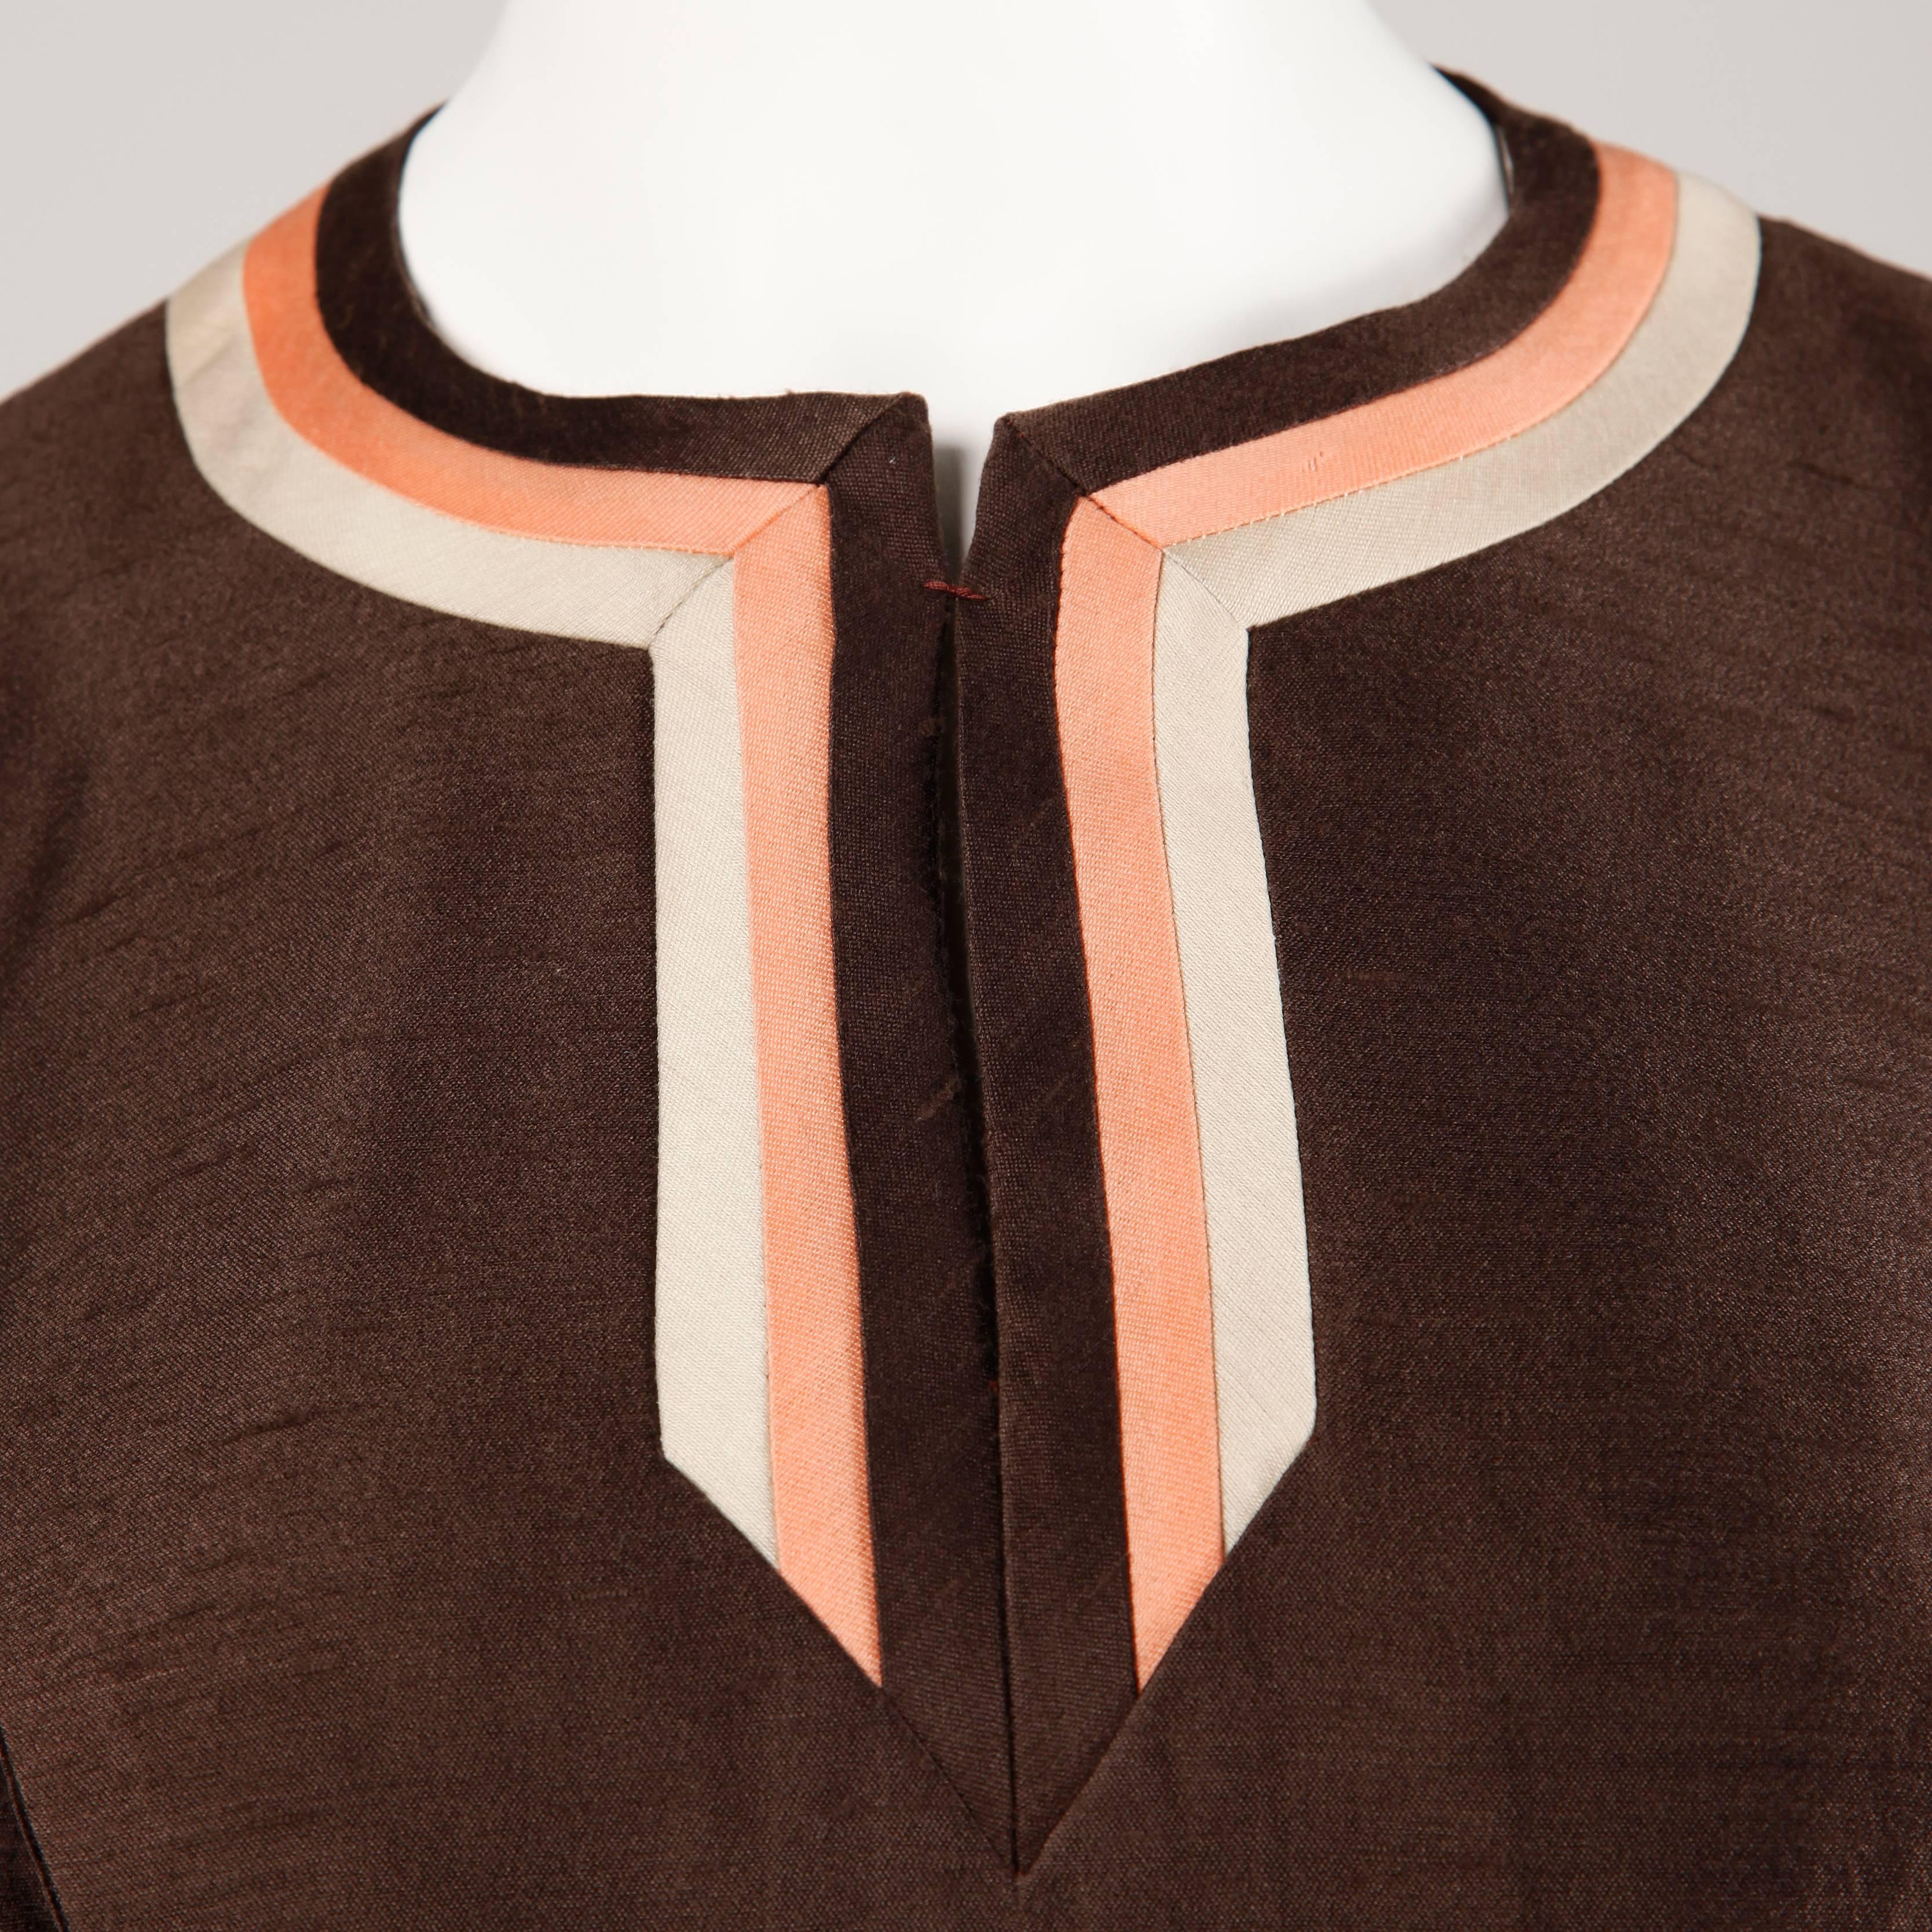 Stunning 1960s Vintage Silk + Wool Pink and Brown Striped Coat + Dress Ensemble For Sale 2